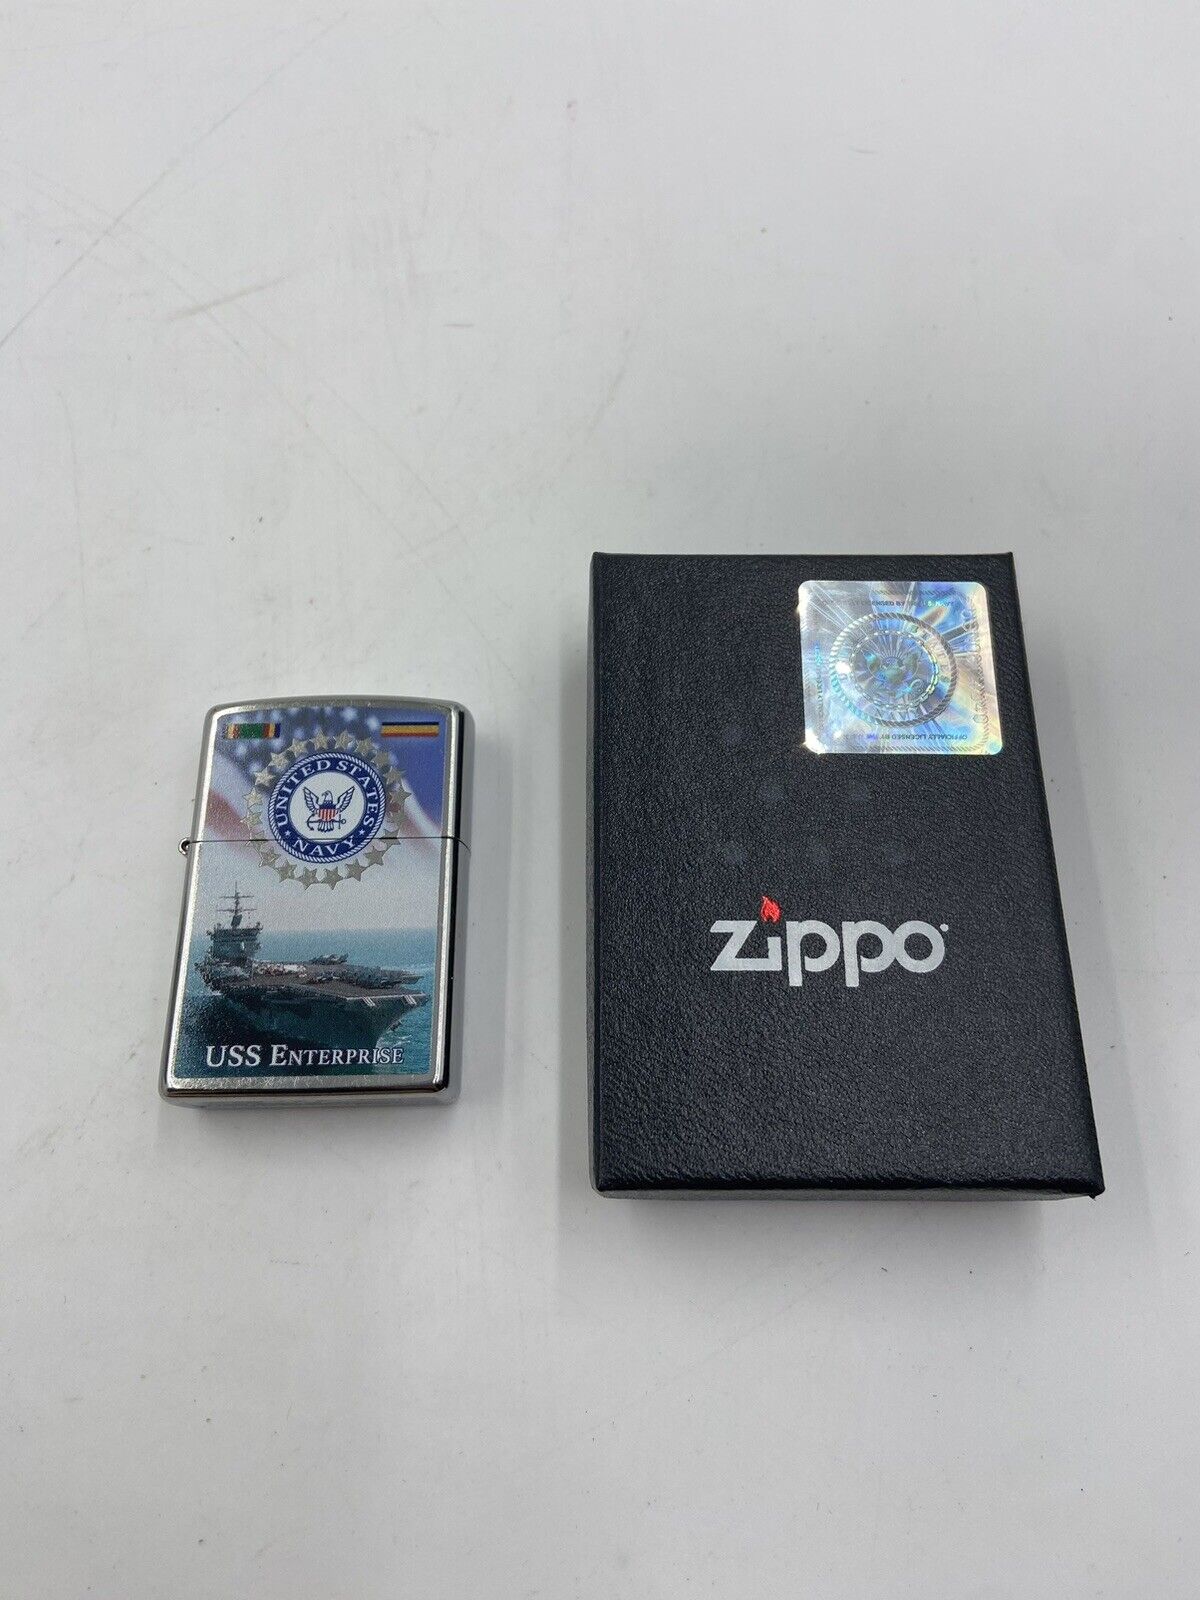 United States Navy USS Enterprise Official Zippo Lighter New In Box Unfired